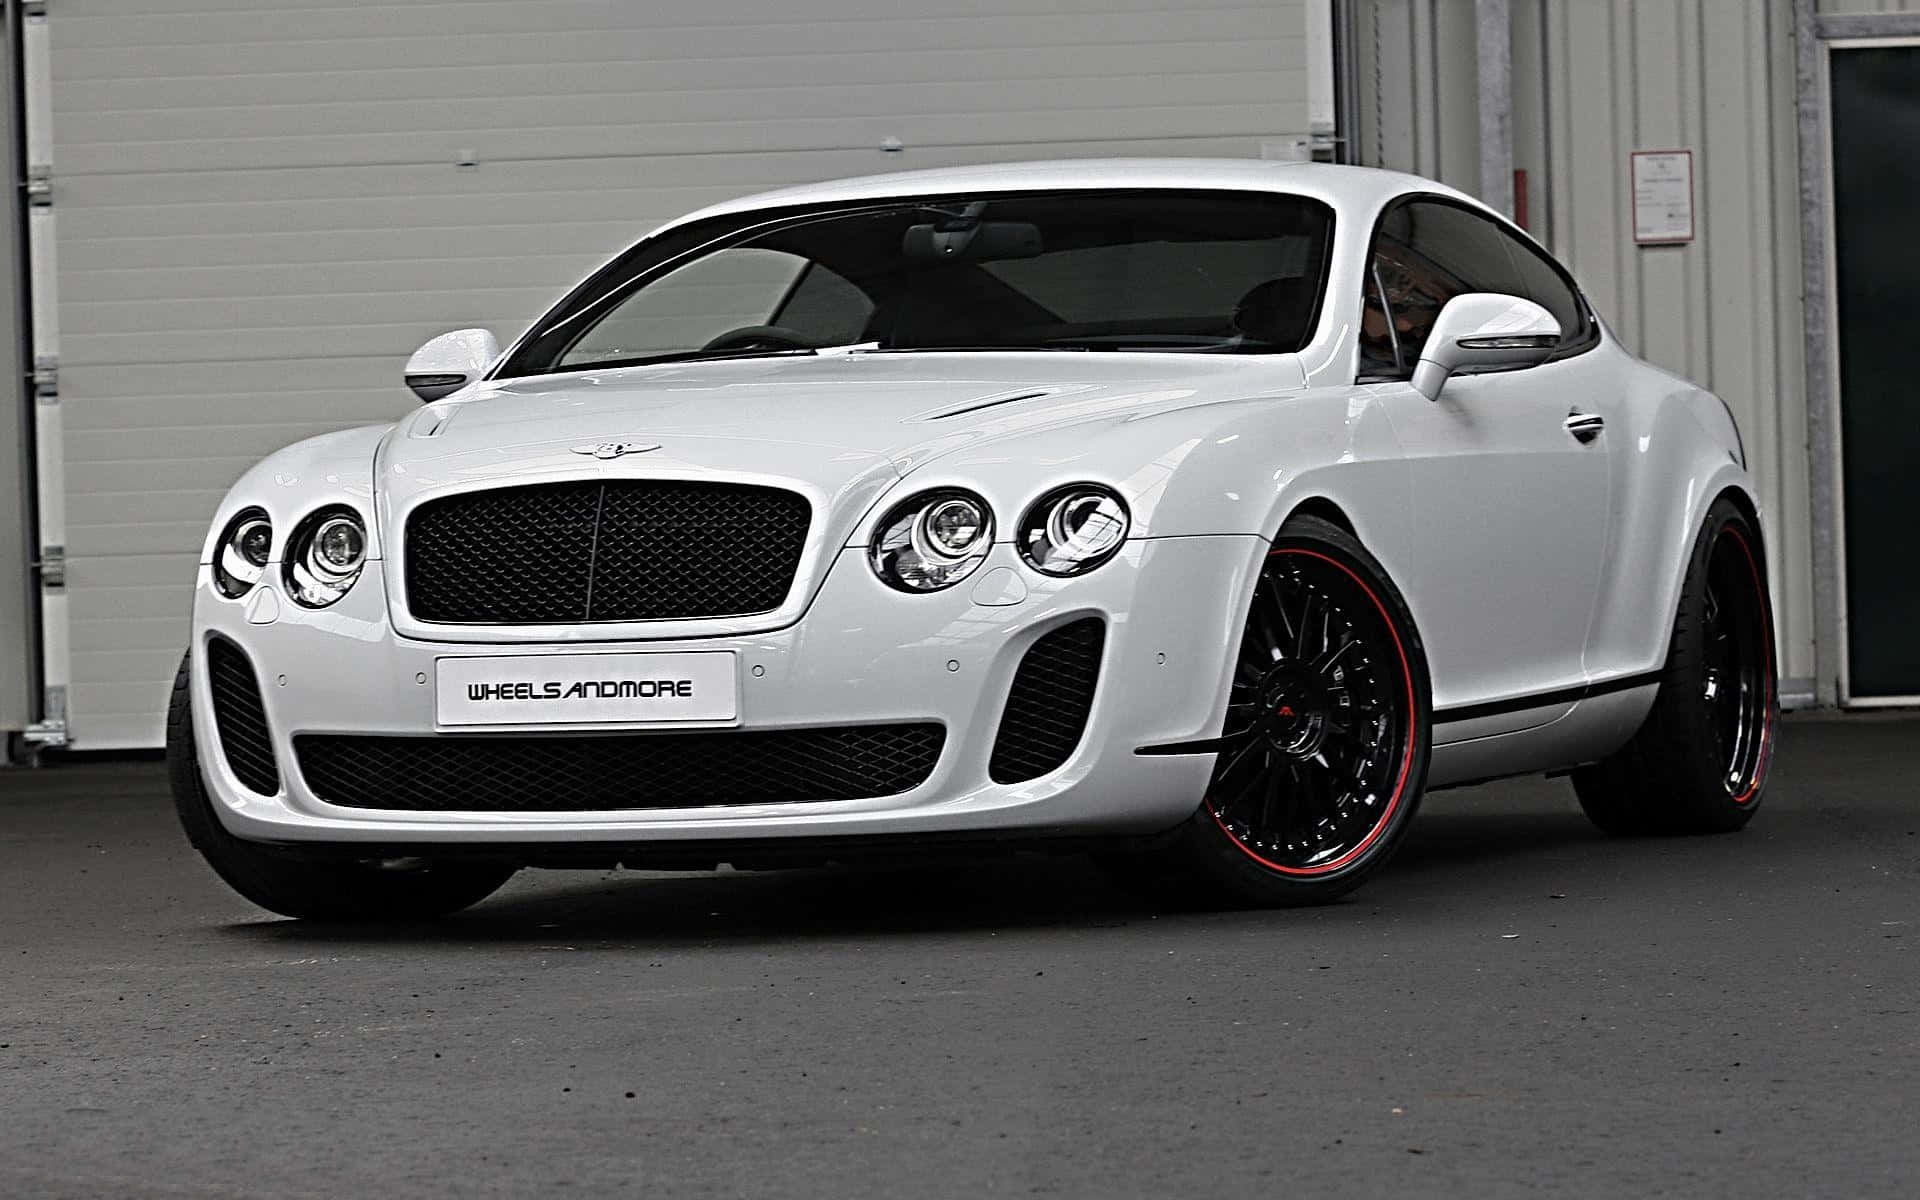 Bentley Continental Gt - Gt - Gt - Gt - Gt - Gt Would Translate To 